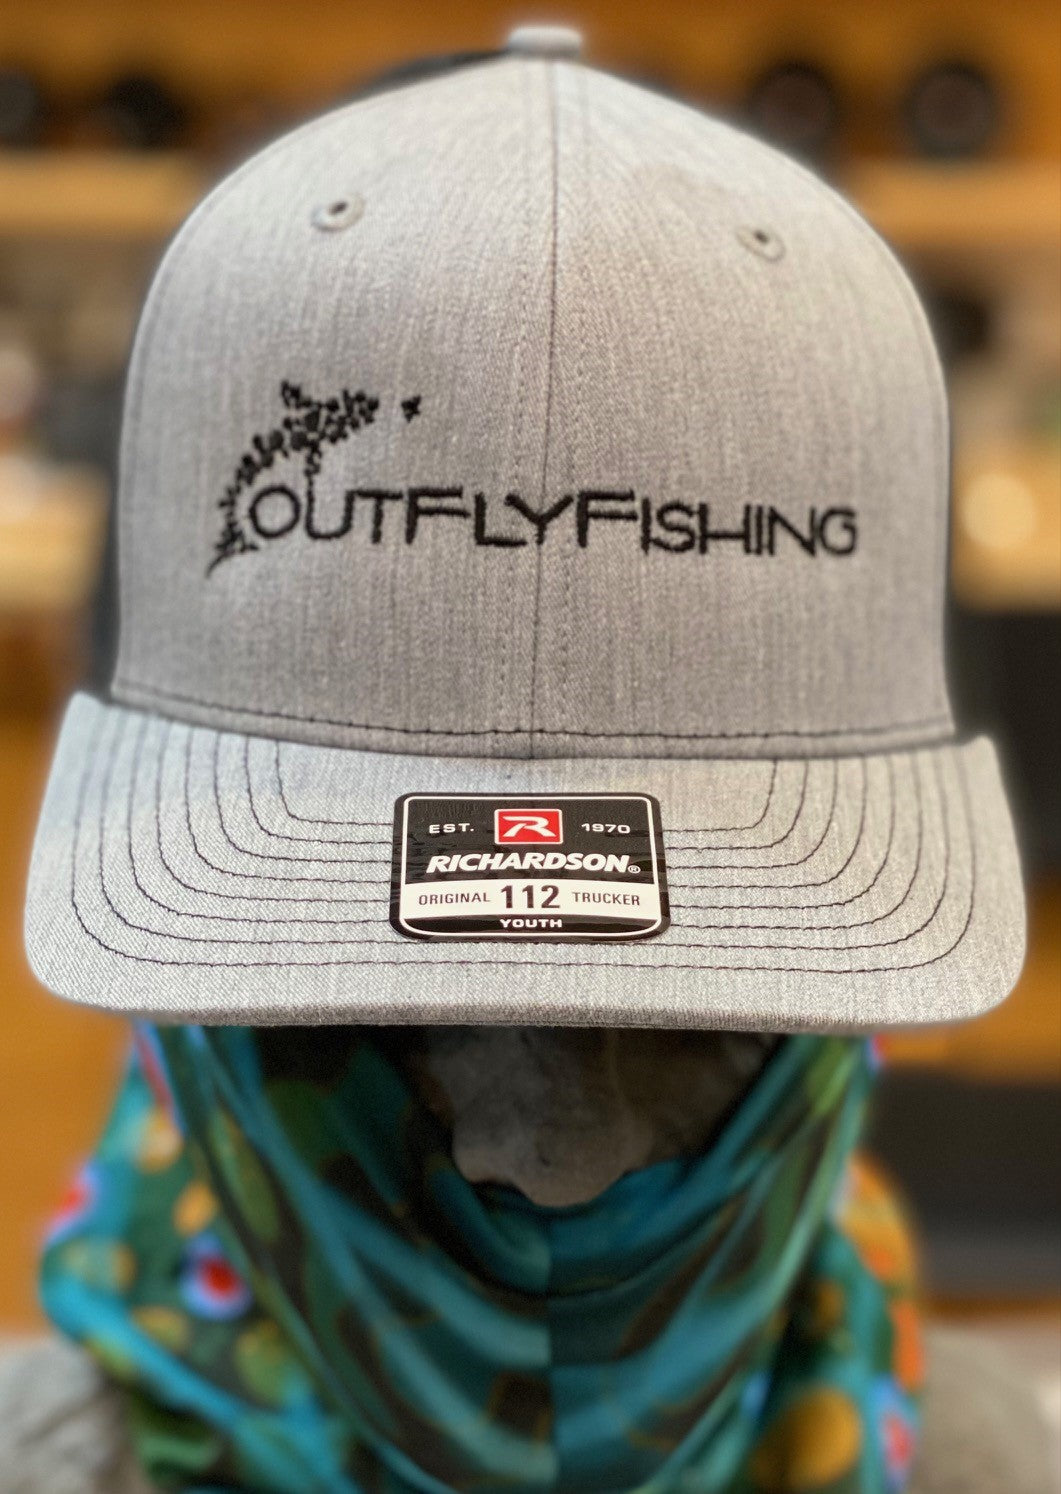 Out Fly Fishing Branded Trucker Logo Hats